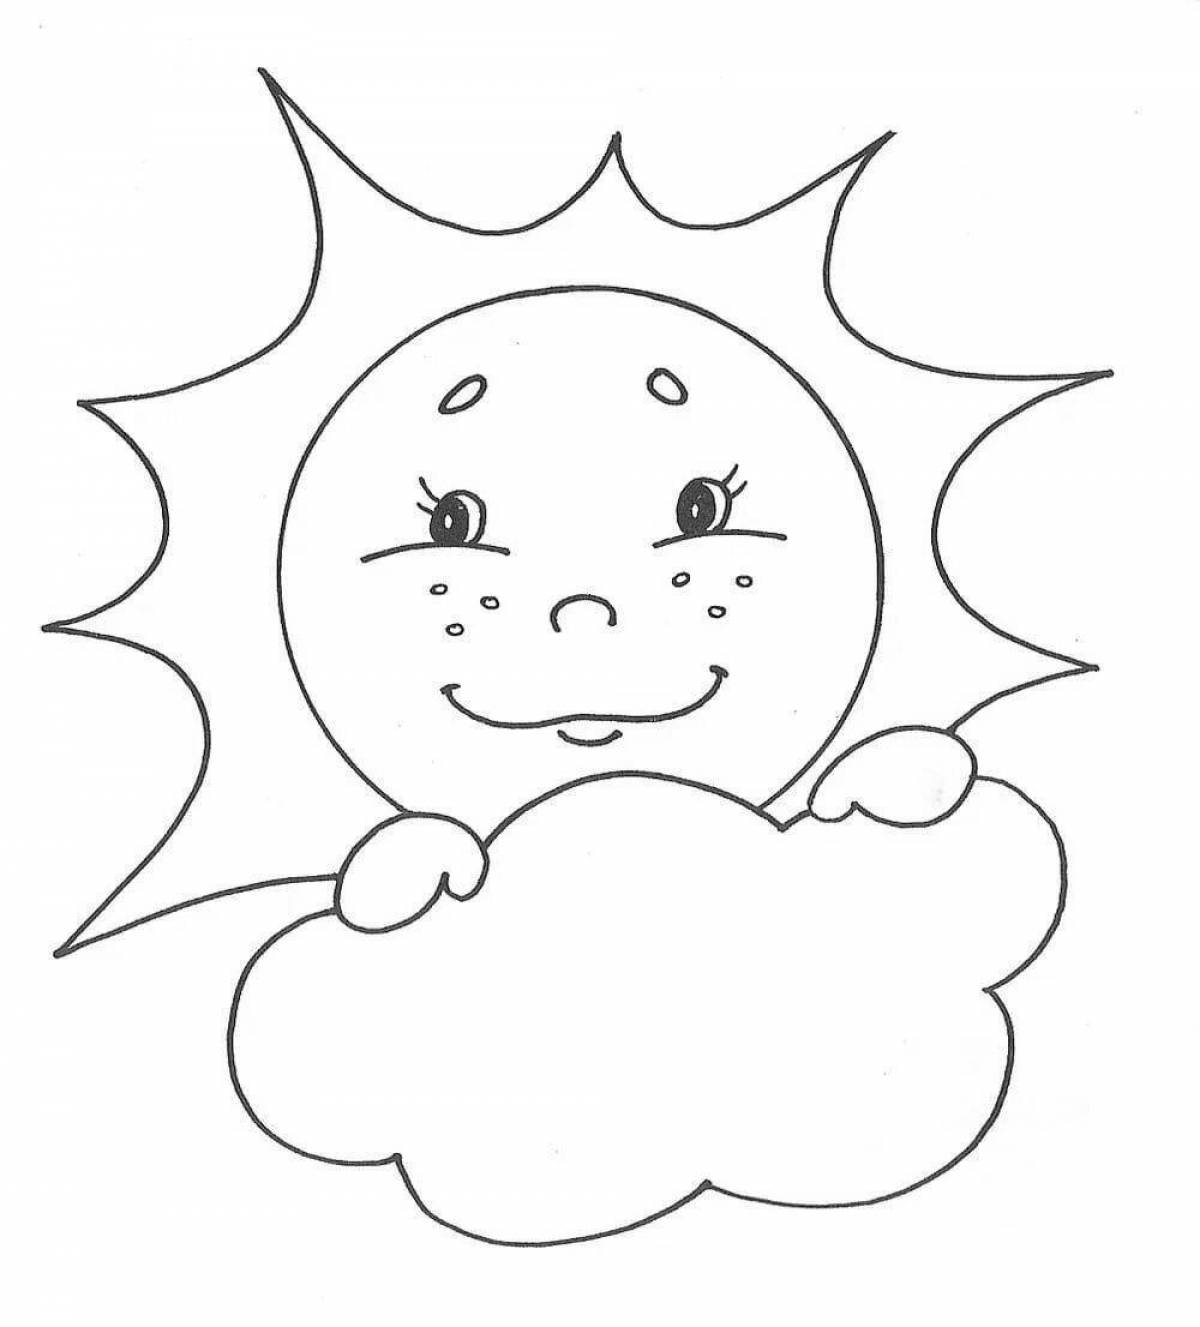 Coloring-wonder coloring page 2 junior group